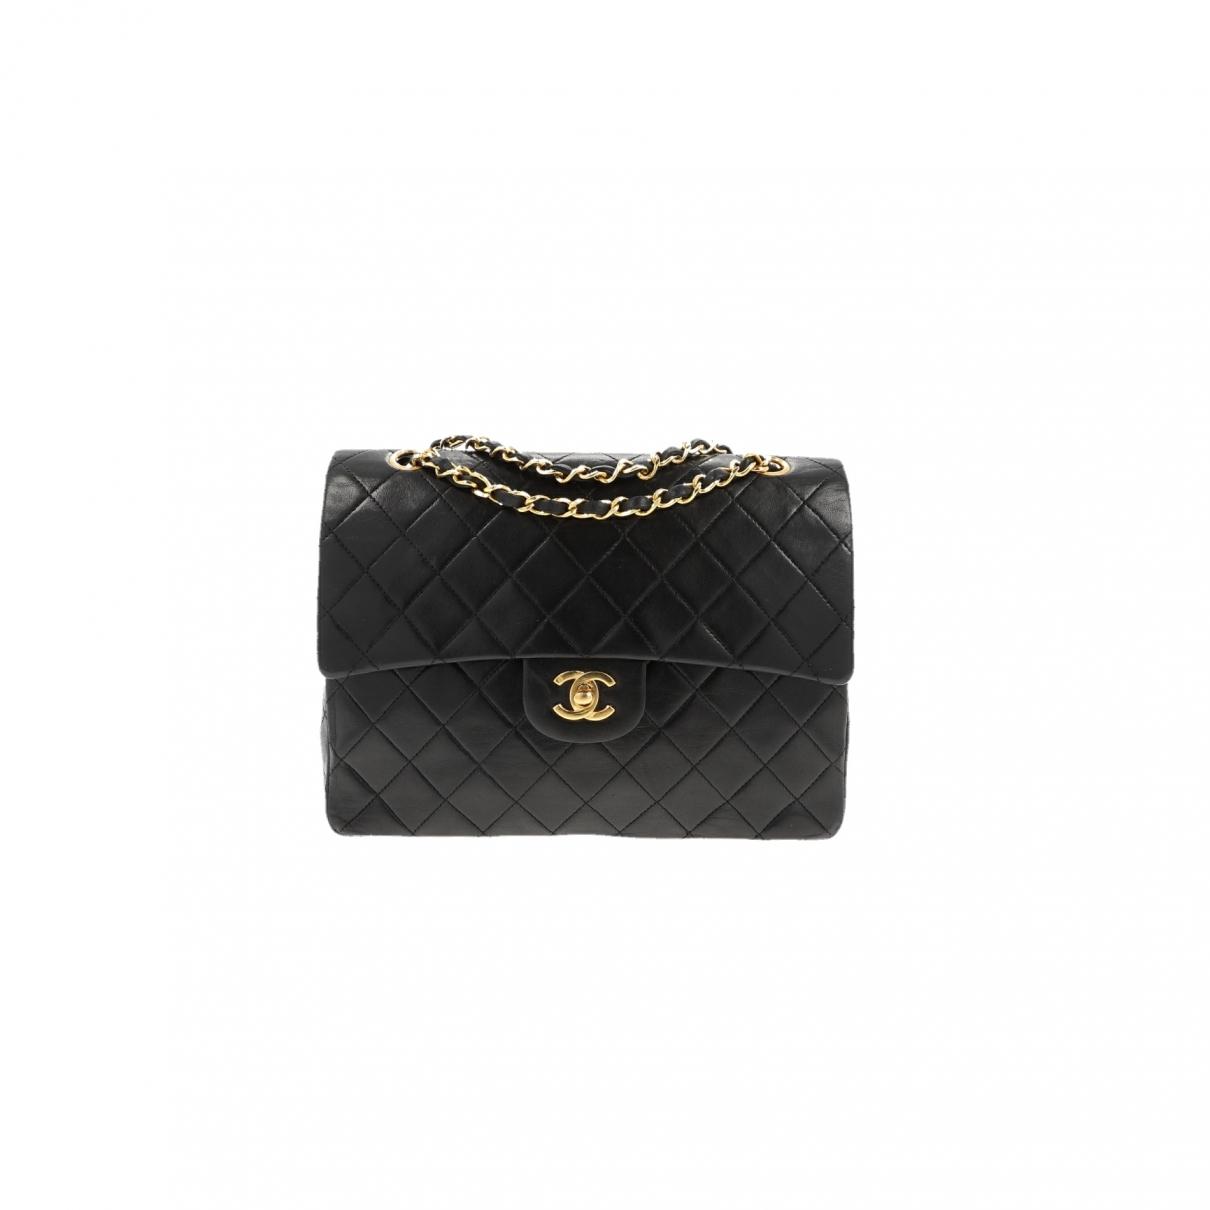 Chanel Pre-owned Timeless/classique Black Leather Handbags in Black - Lyst